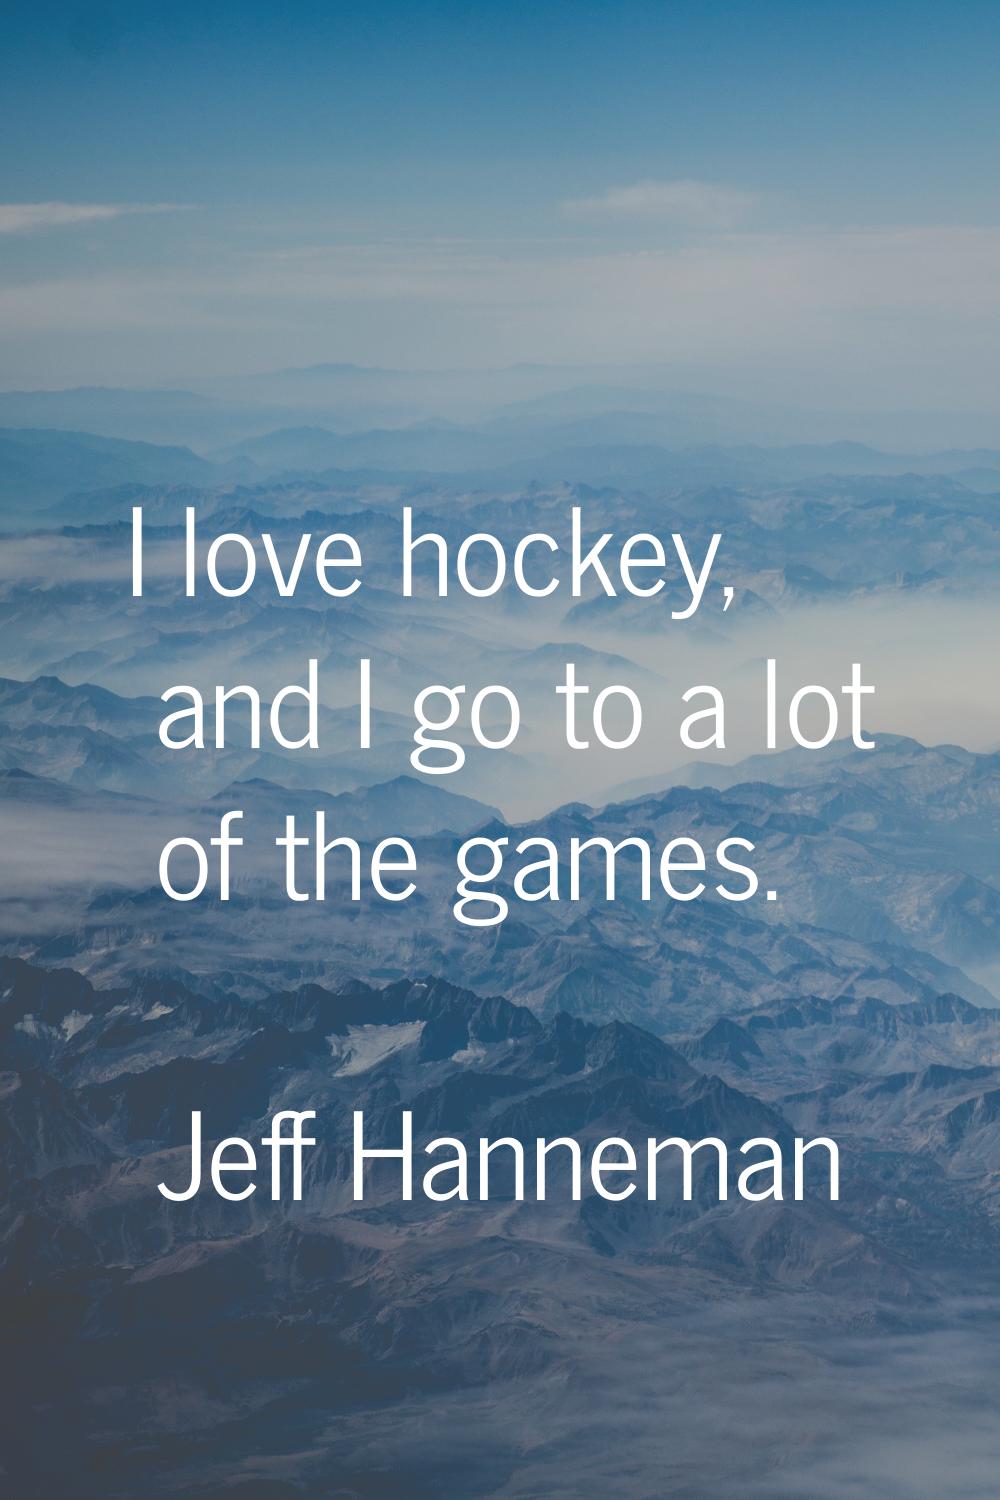 I love hockey, and I go to a lot of the games.